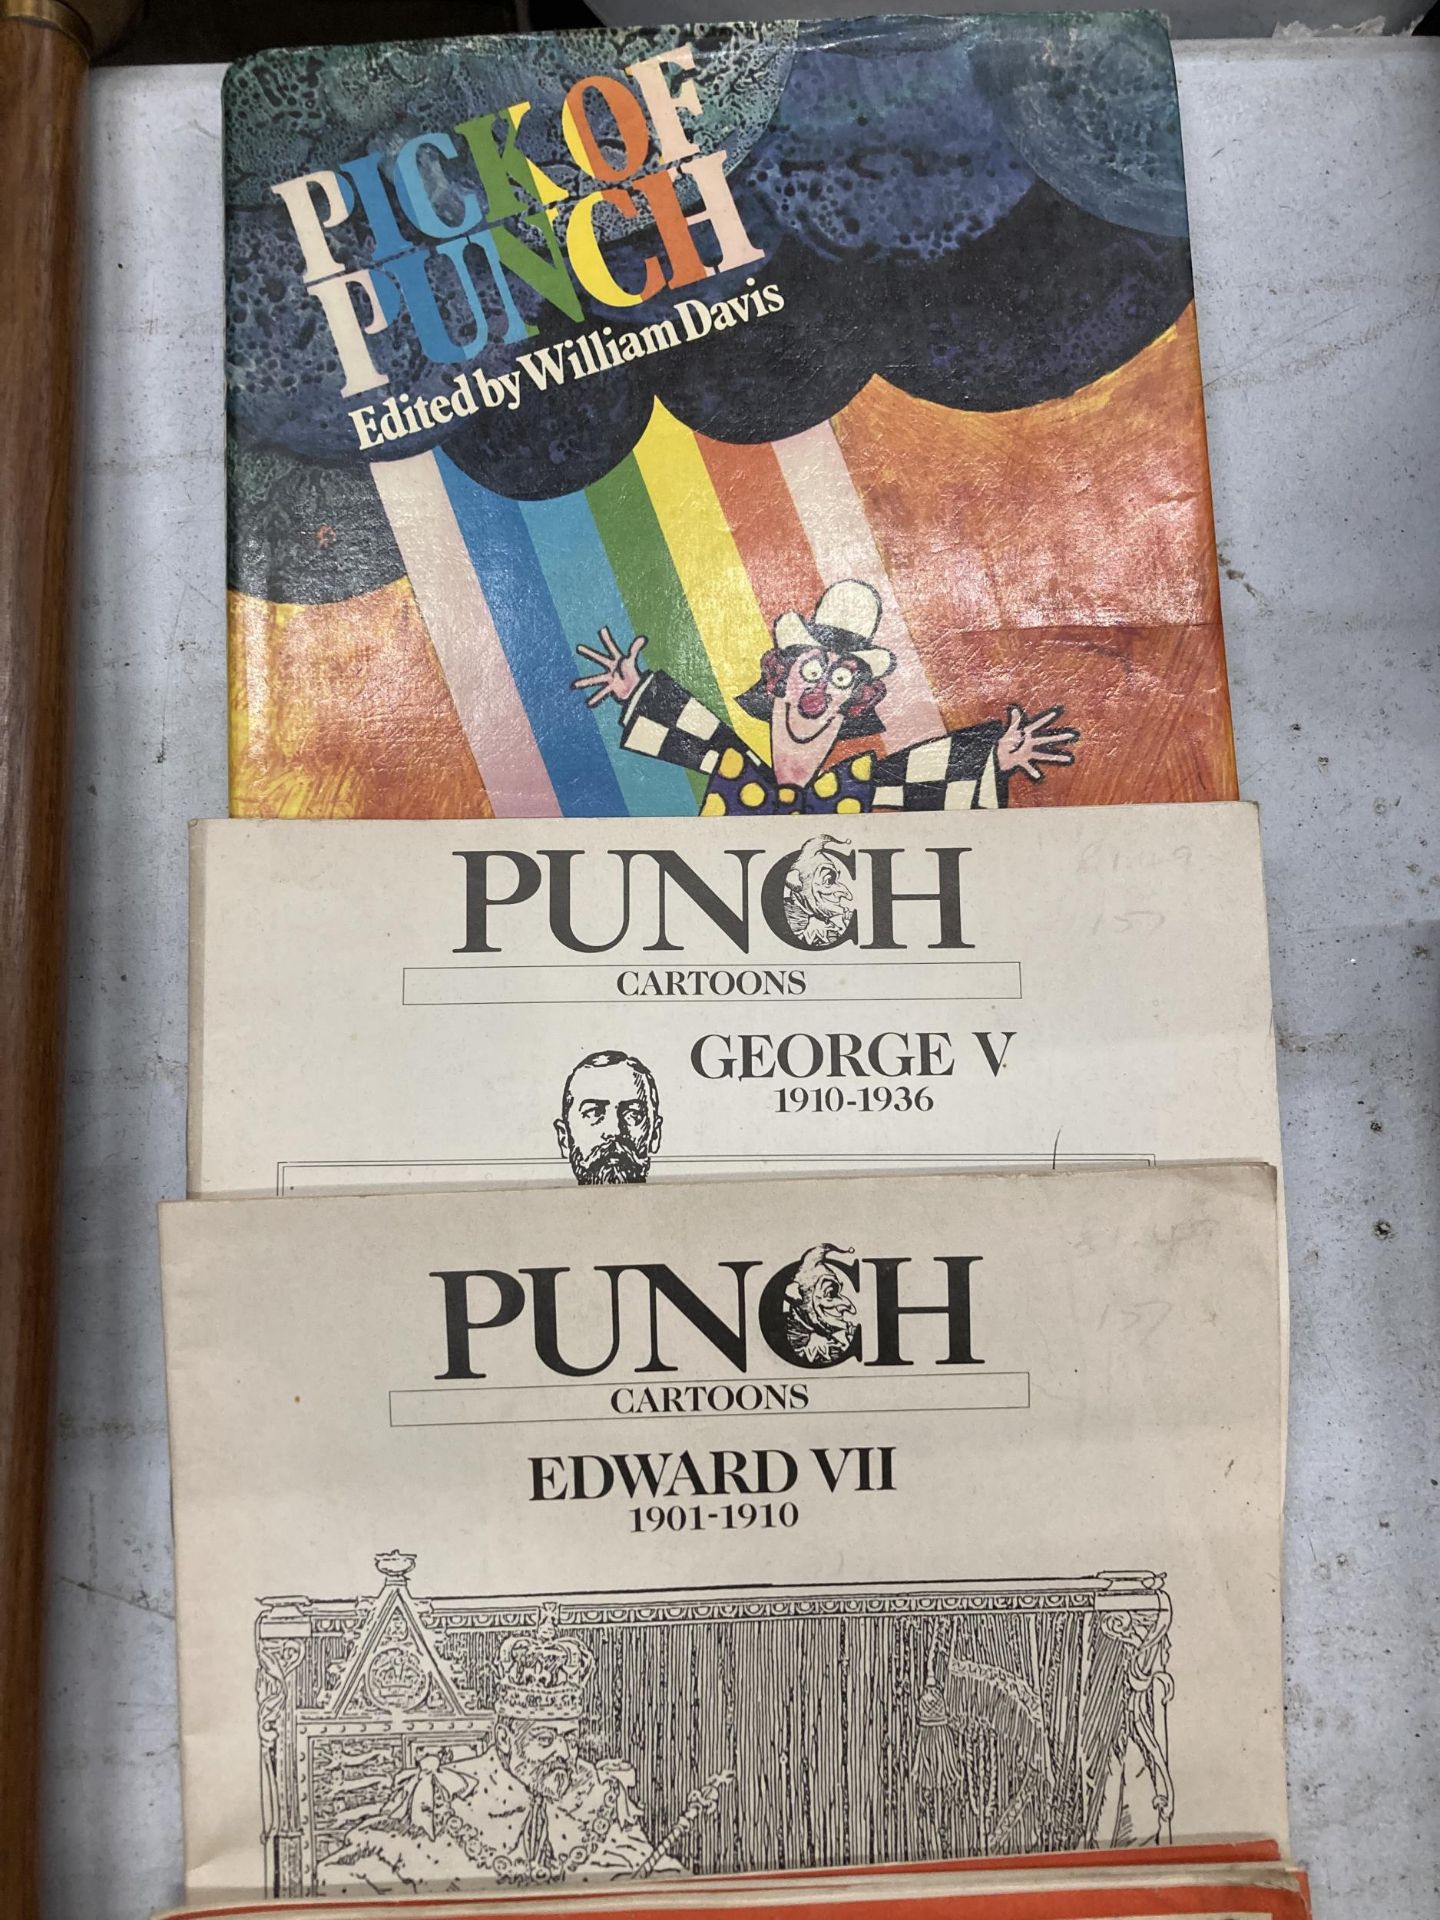 SIX 1952 PUNCH MAGAZINES AND A PUNCH BOOK - Image 2 of 3